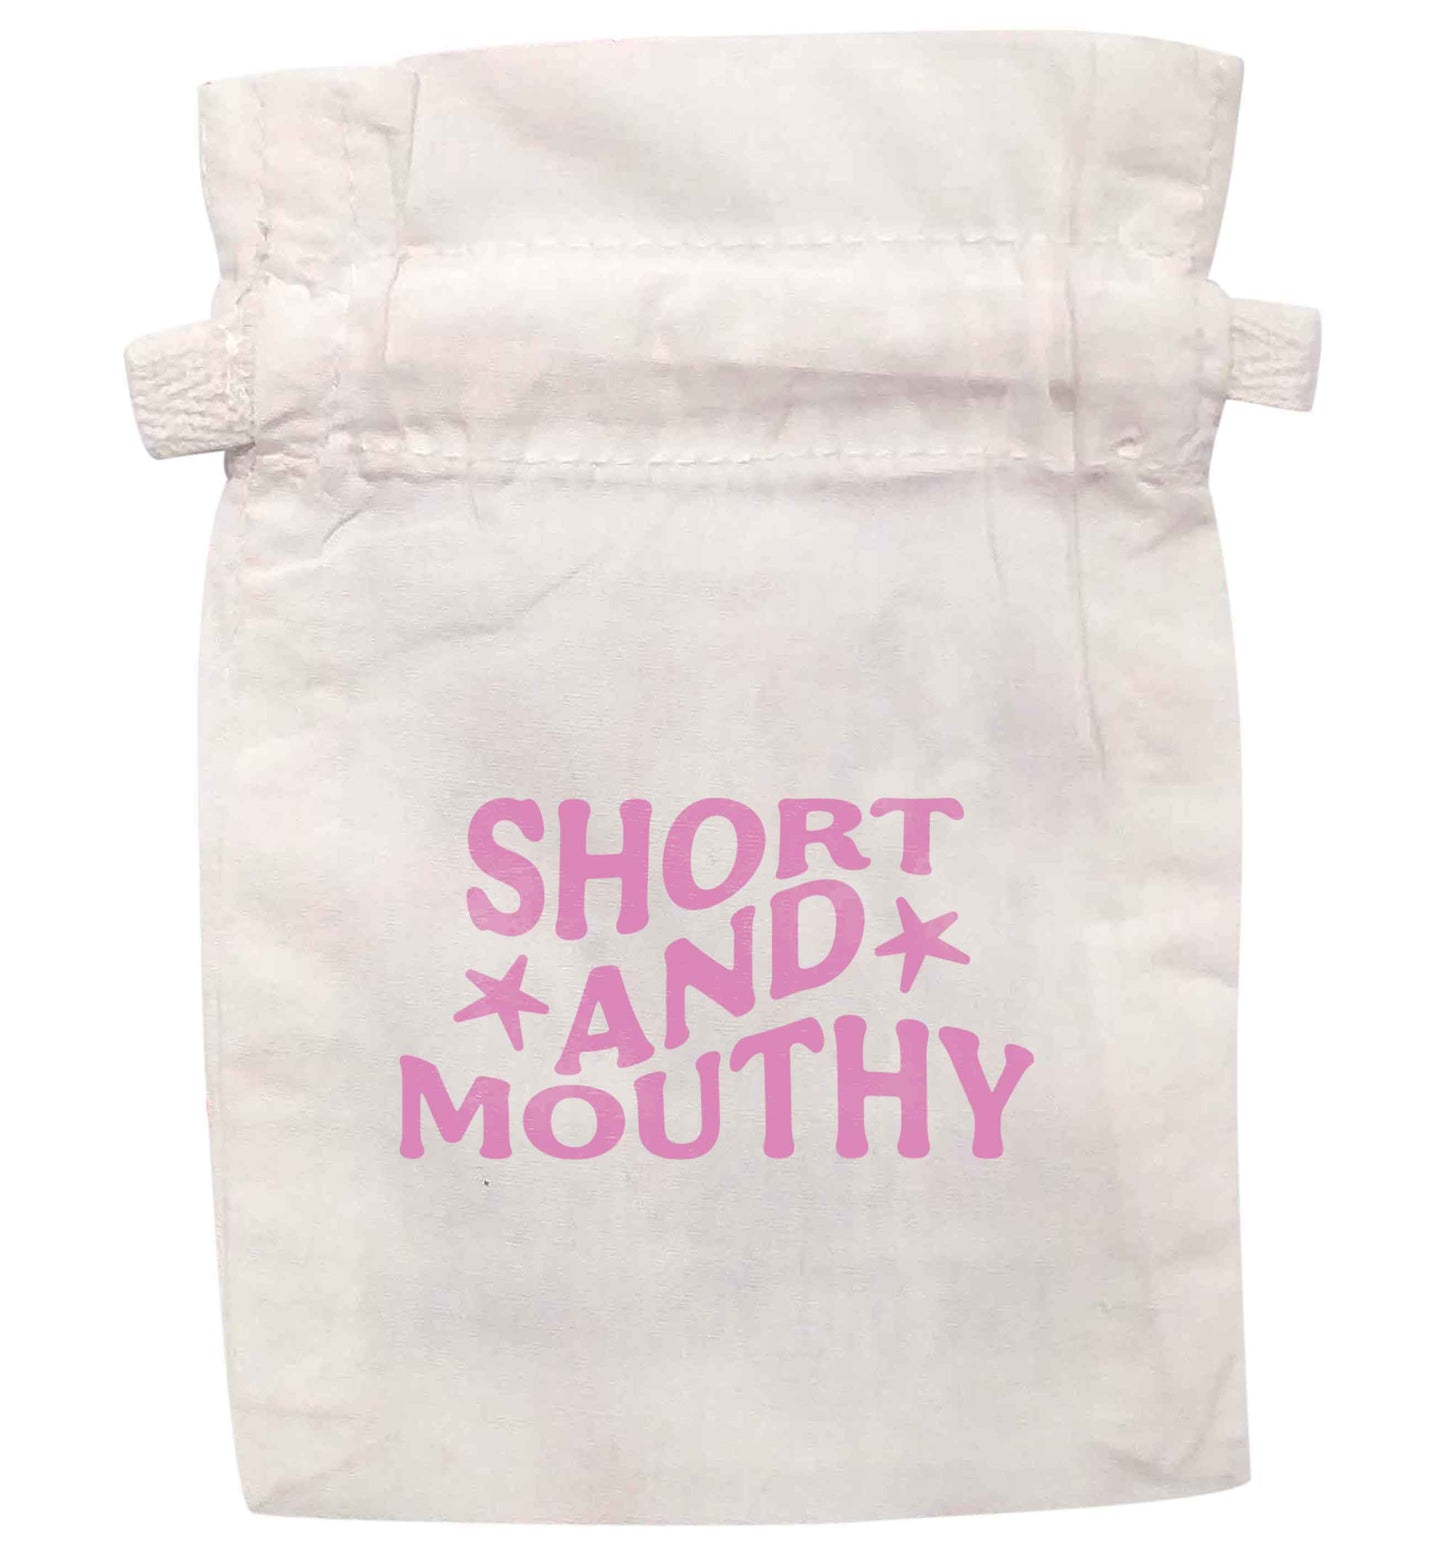 Short and mouthy  |  XS - L | Pouch / Drawstring bag / Sack | Organic Cotton | Bulk discounts available!